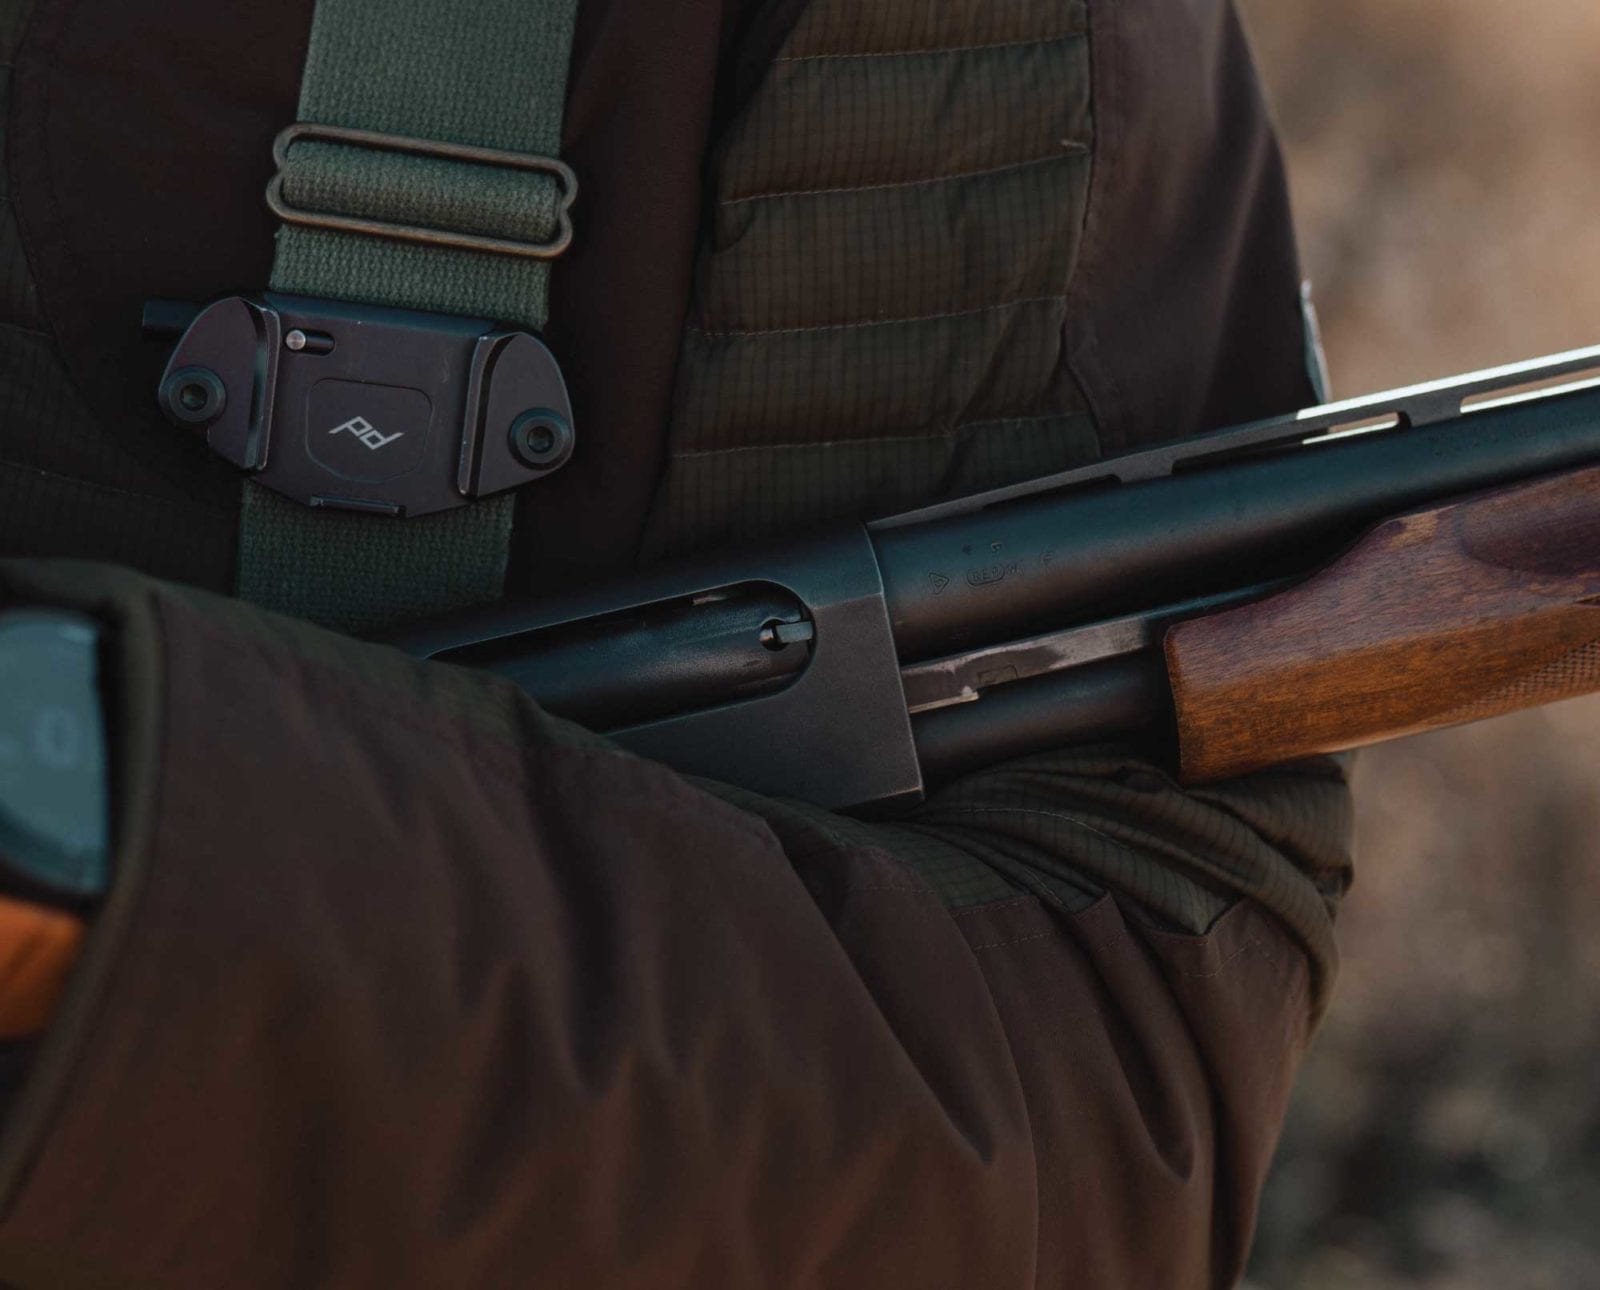 The Remington 870 Express is a better choice if you're buying an 870.